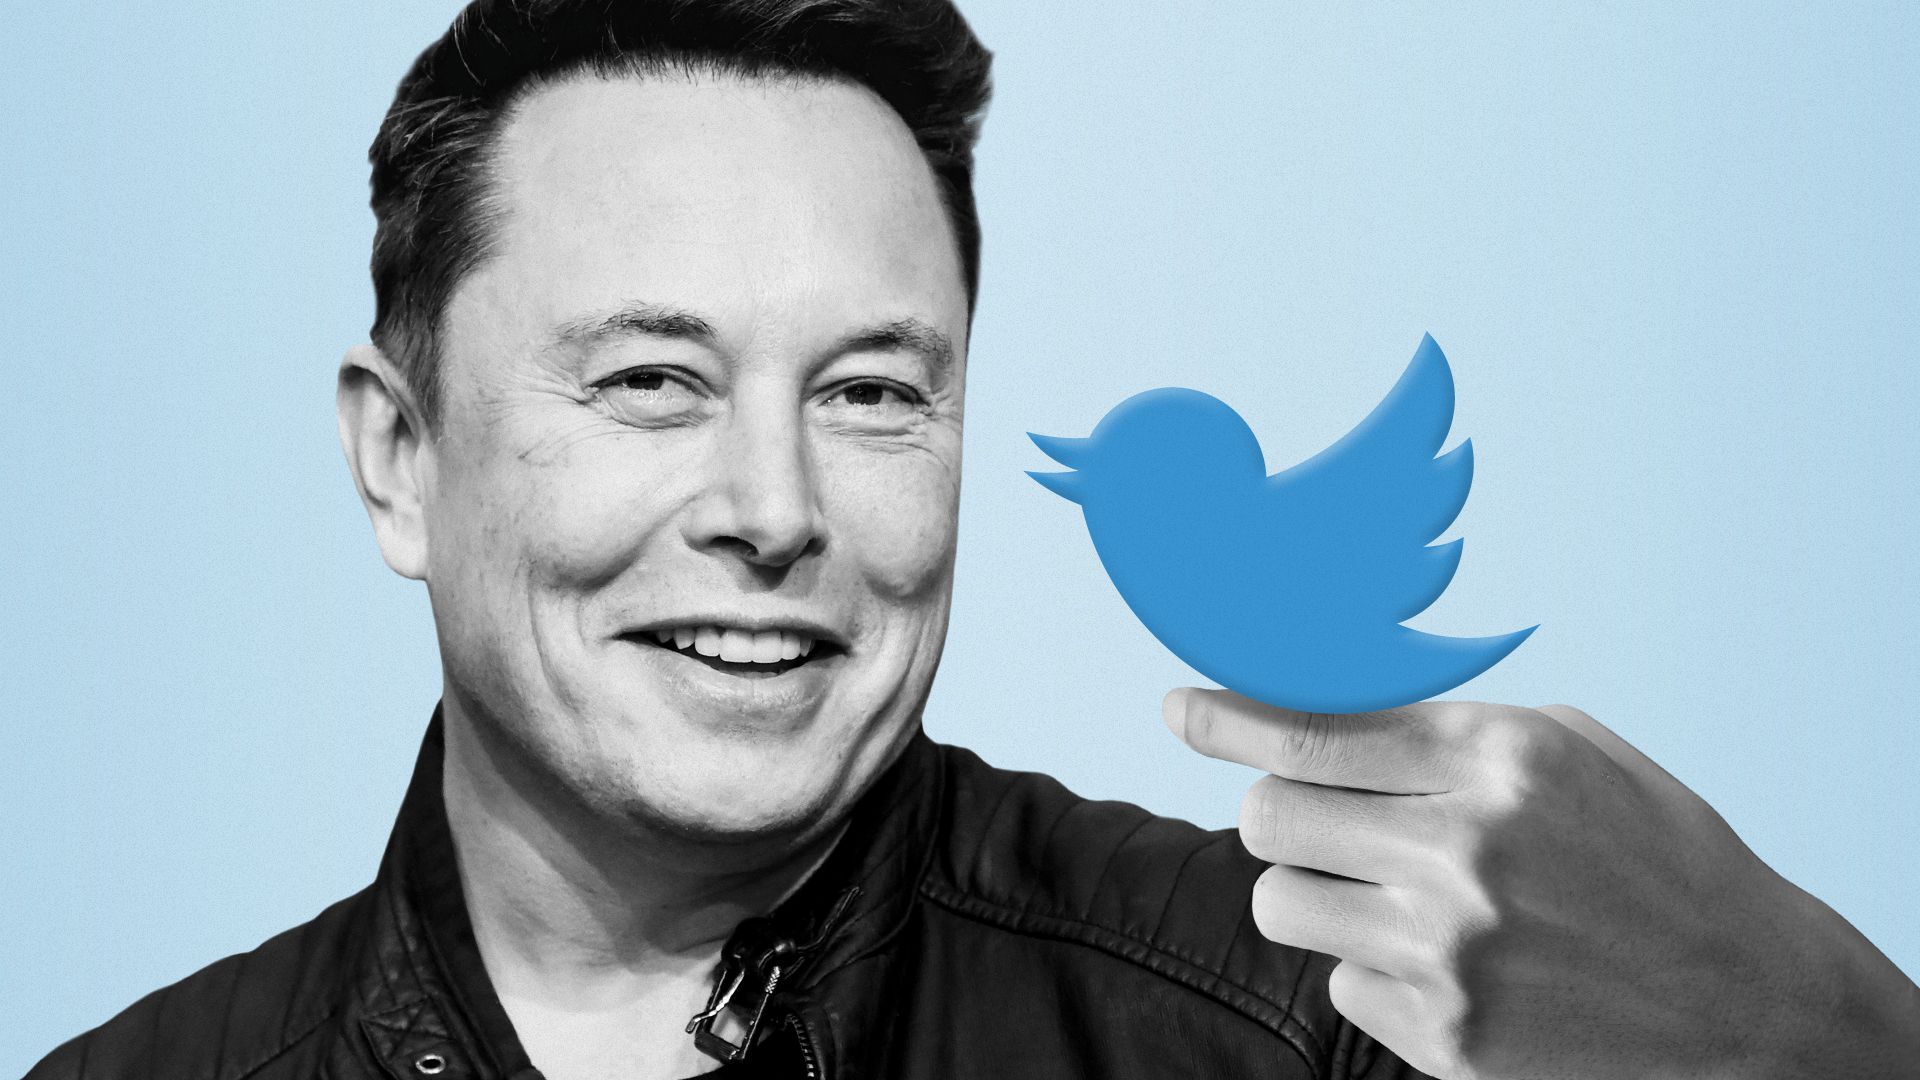 Illustration of the Twitter logo perched on Elon Musk's hand.